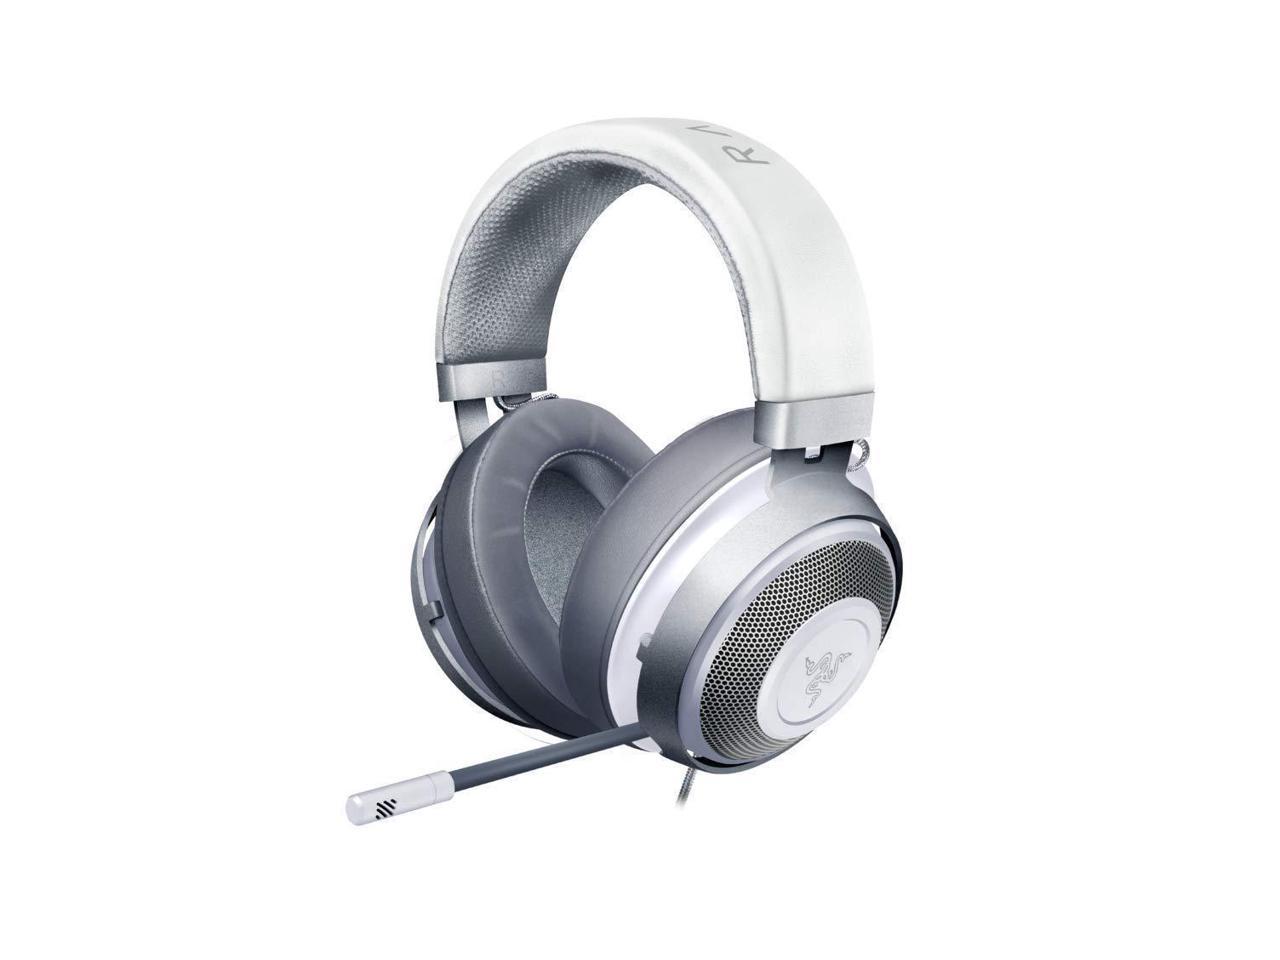 Razer Kraken Competitive Gaming Headset - Noise Cancelling Microphone - White